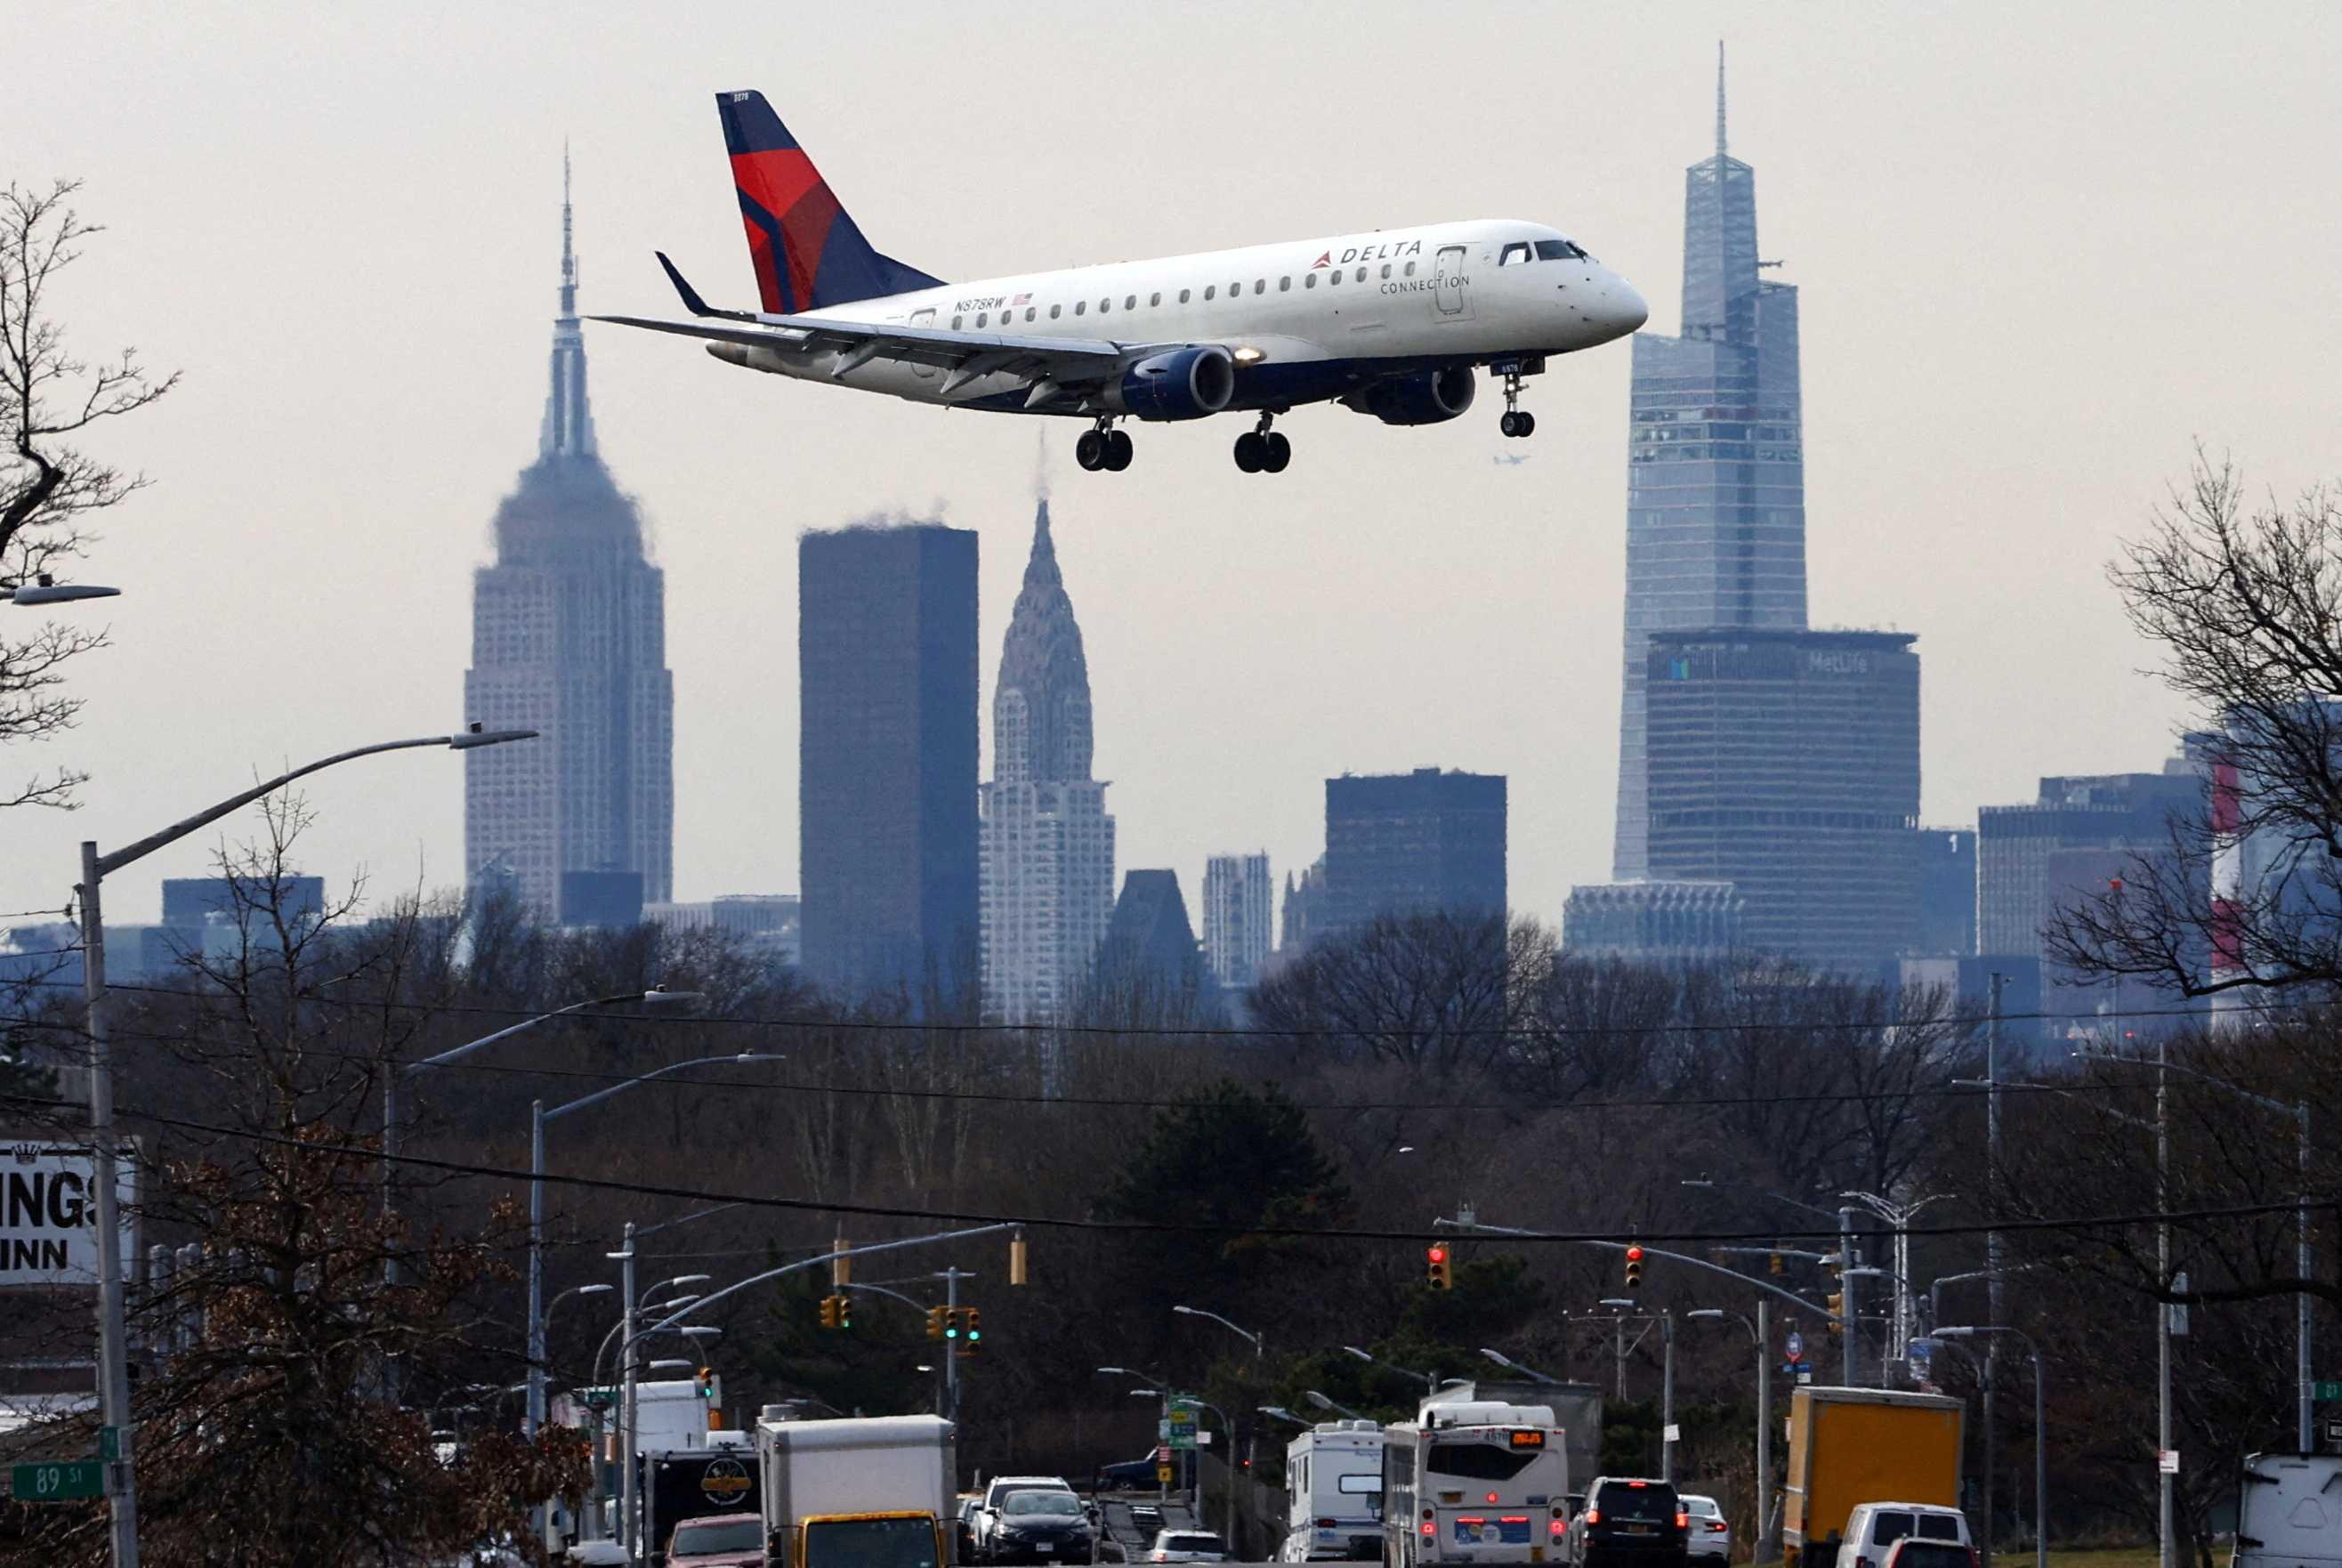 A Delta Airlines jet comes in for a landing in front of the Empire State Building and Manhattan skyline after flights earlier were grounded during an FAA system outage at Laguardia Airport, in New York City, New York, US, Jan 11. Photo: Reuters